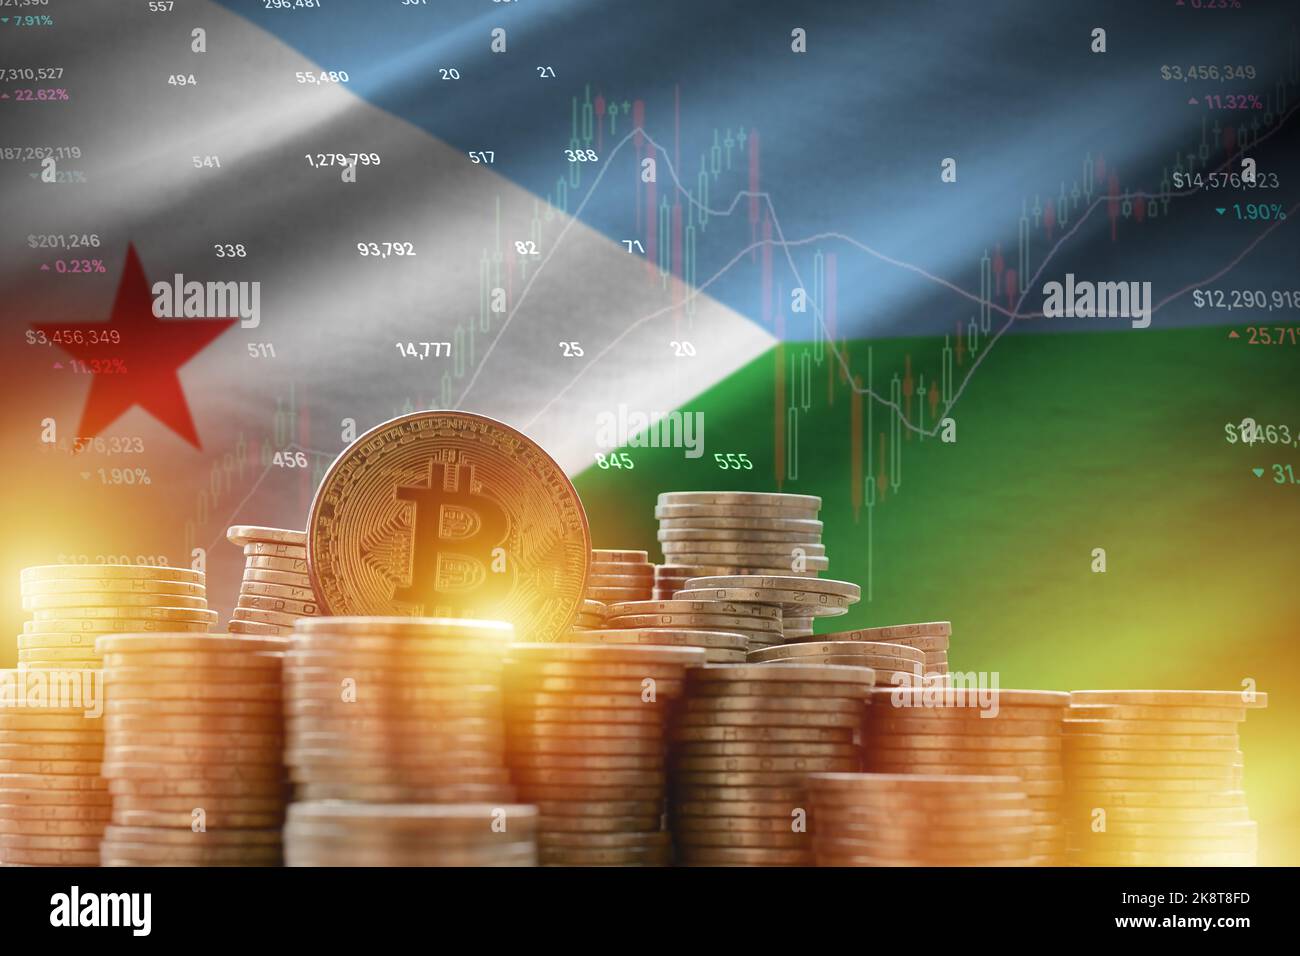 Djibouti flag and big amount of golden bitcoin coins and trading platform chart. Crypto currency concept Stock Photo